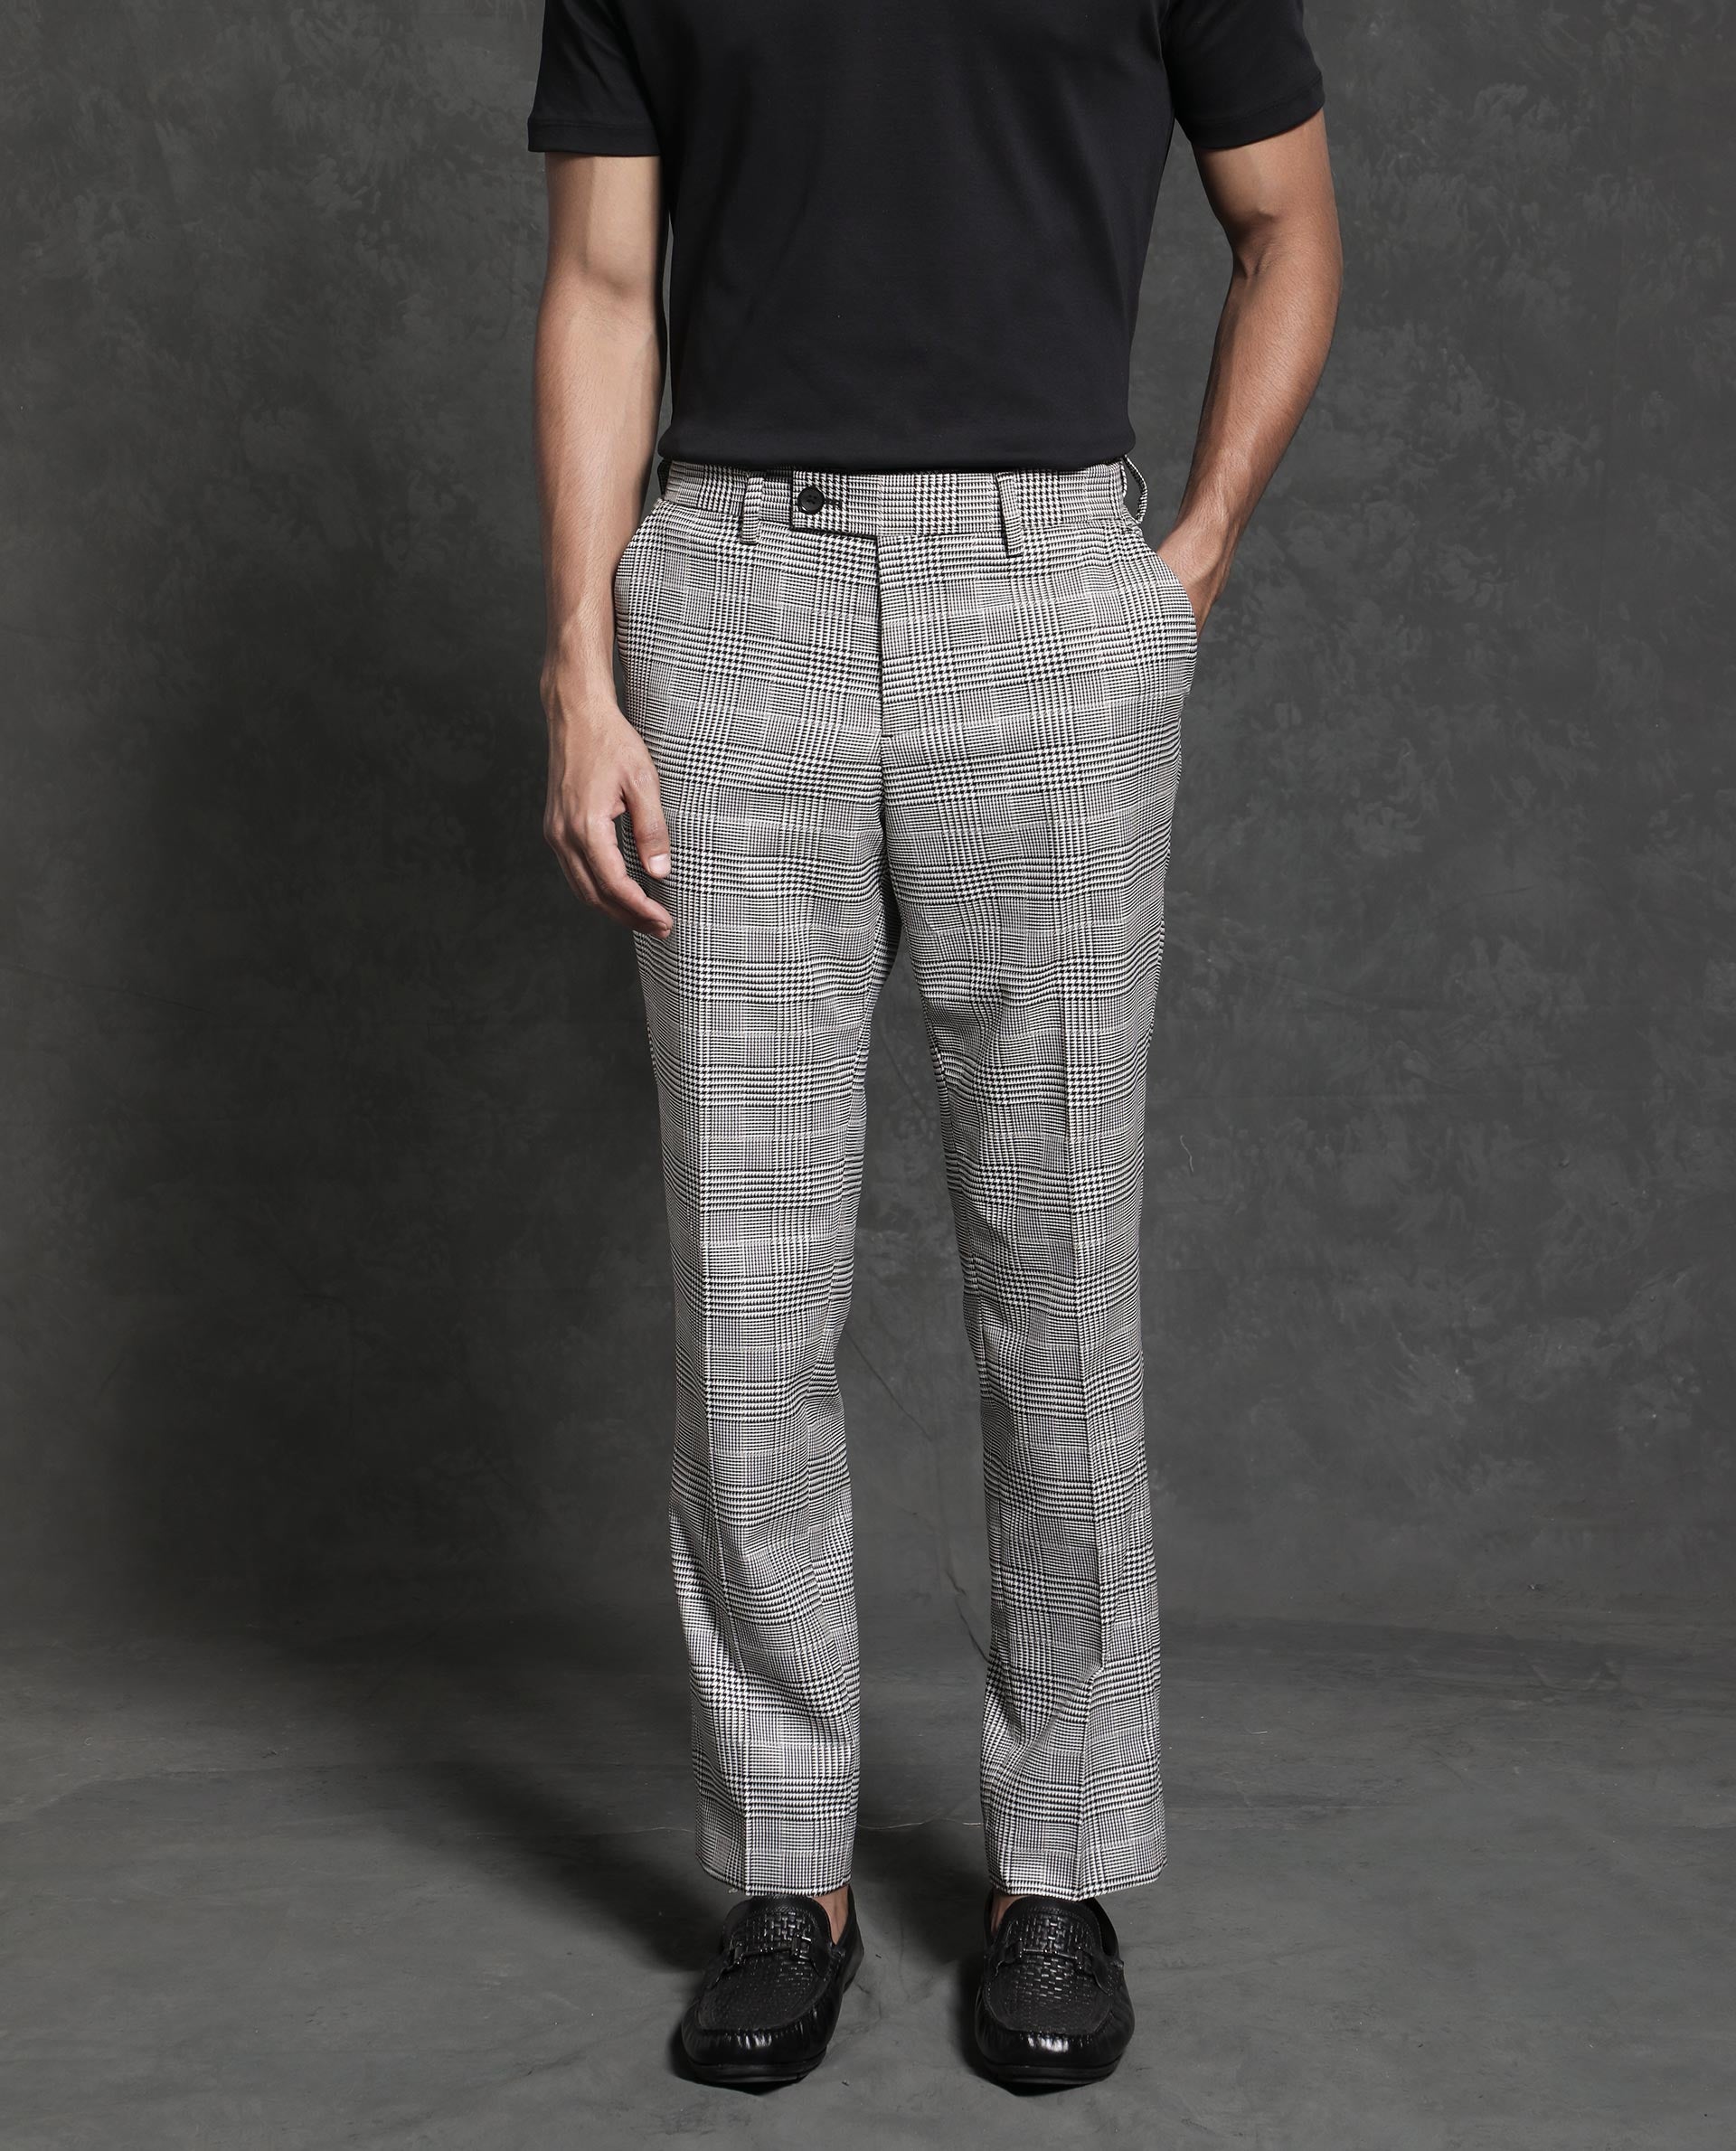 Buy Black Cotton Printed Checkered Trouser Pant For Men by Son of A Noble  Snob Online at Aza Fashions.